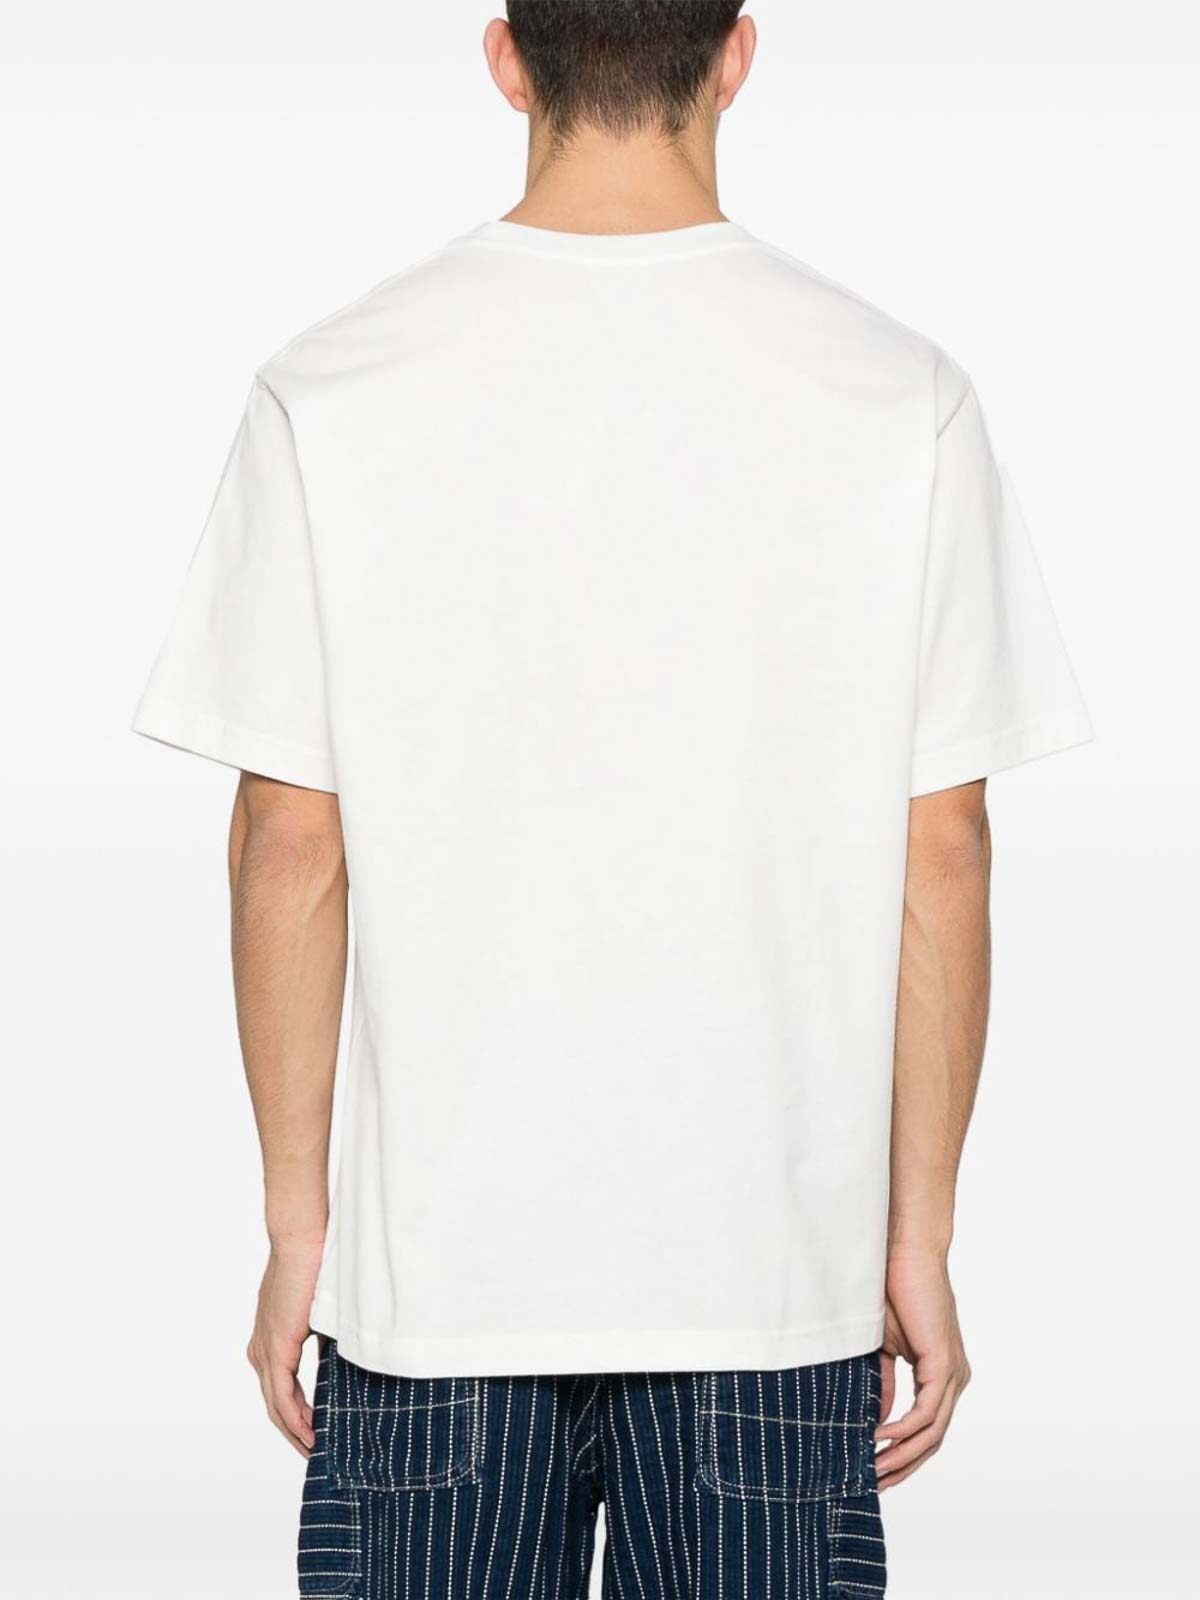 Shop Kenzo Floral Print T-shirt In White